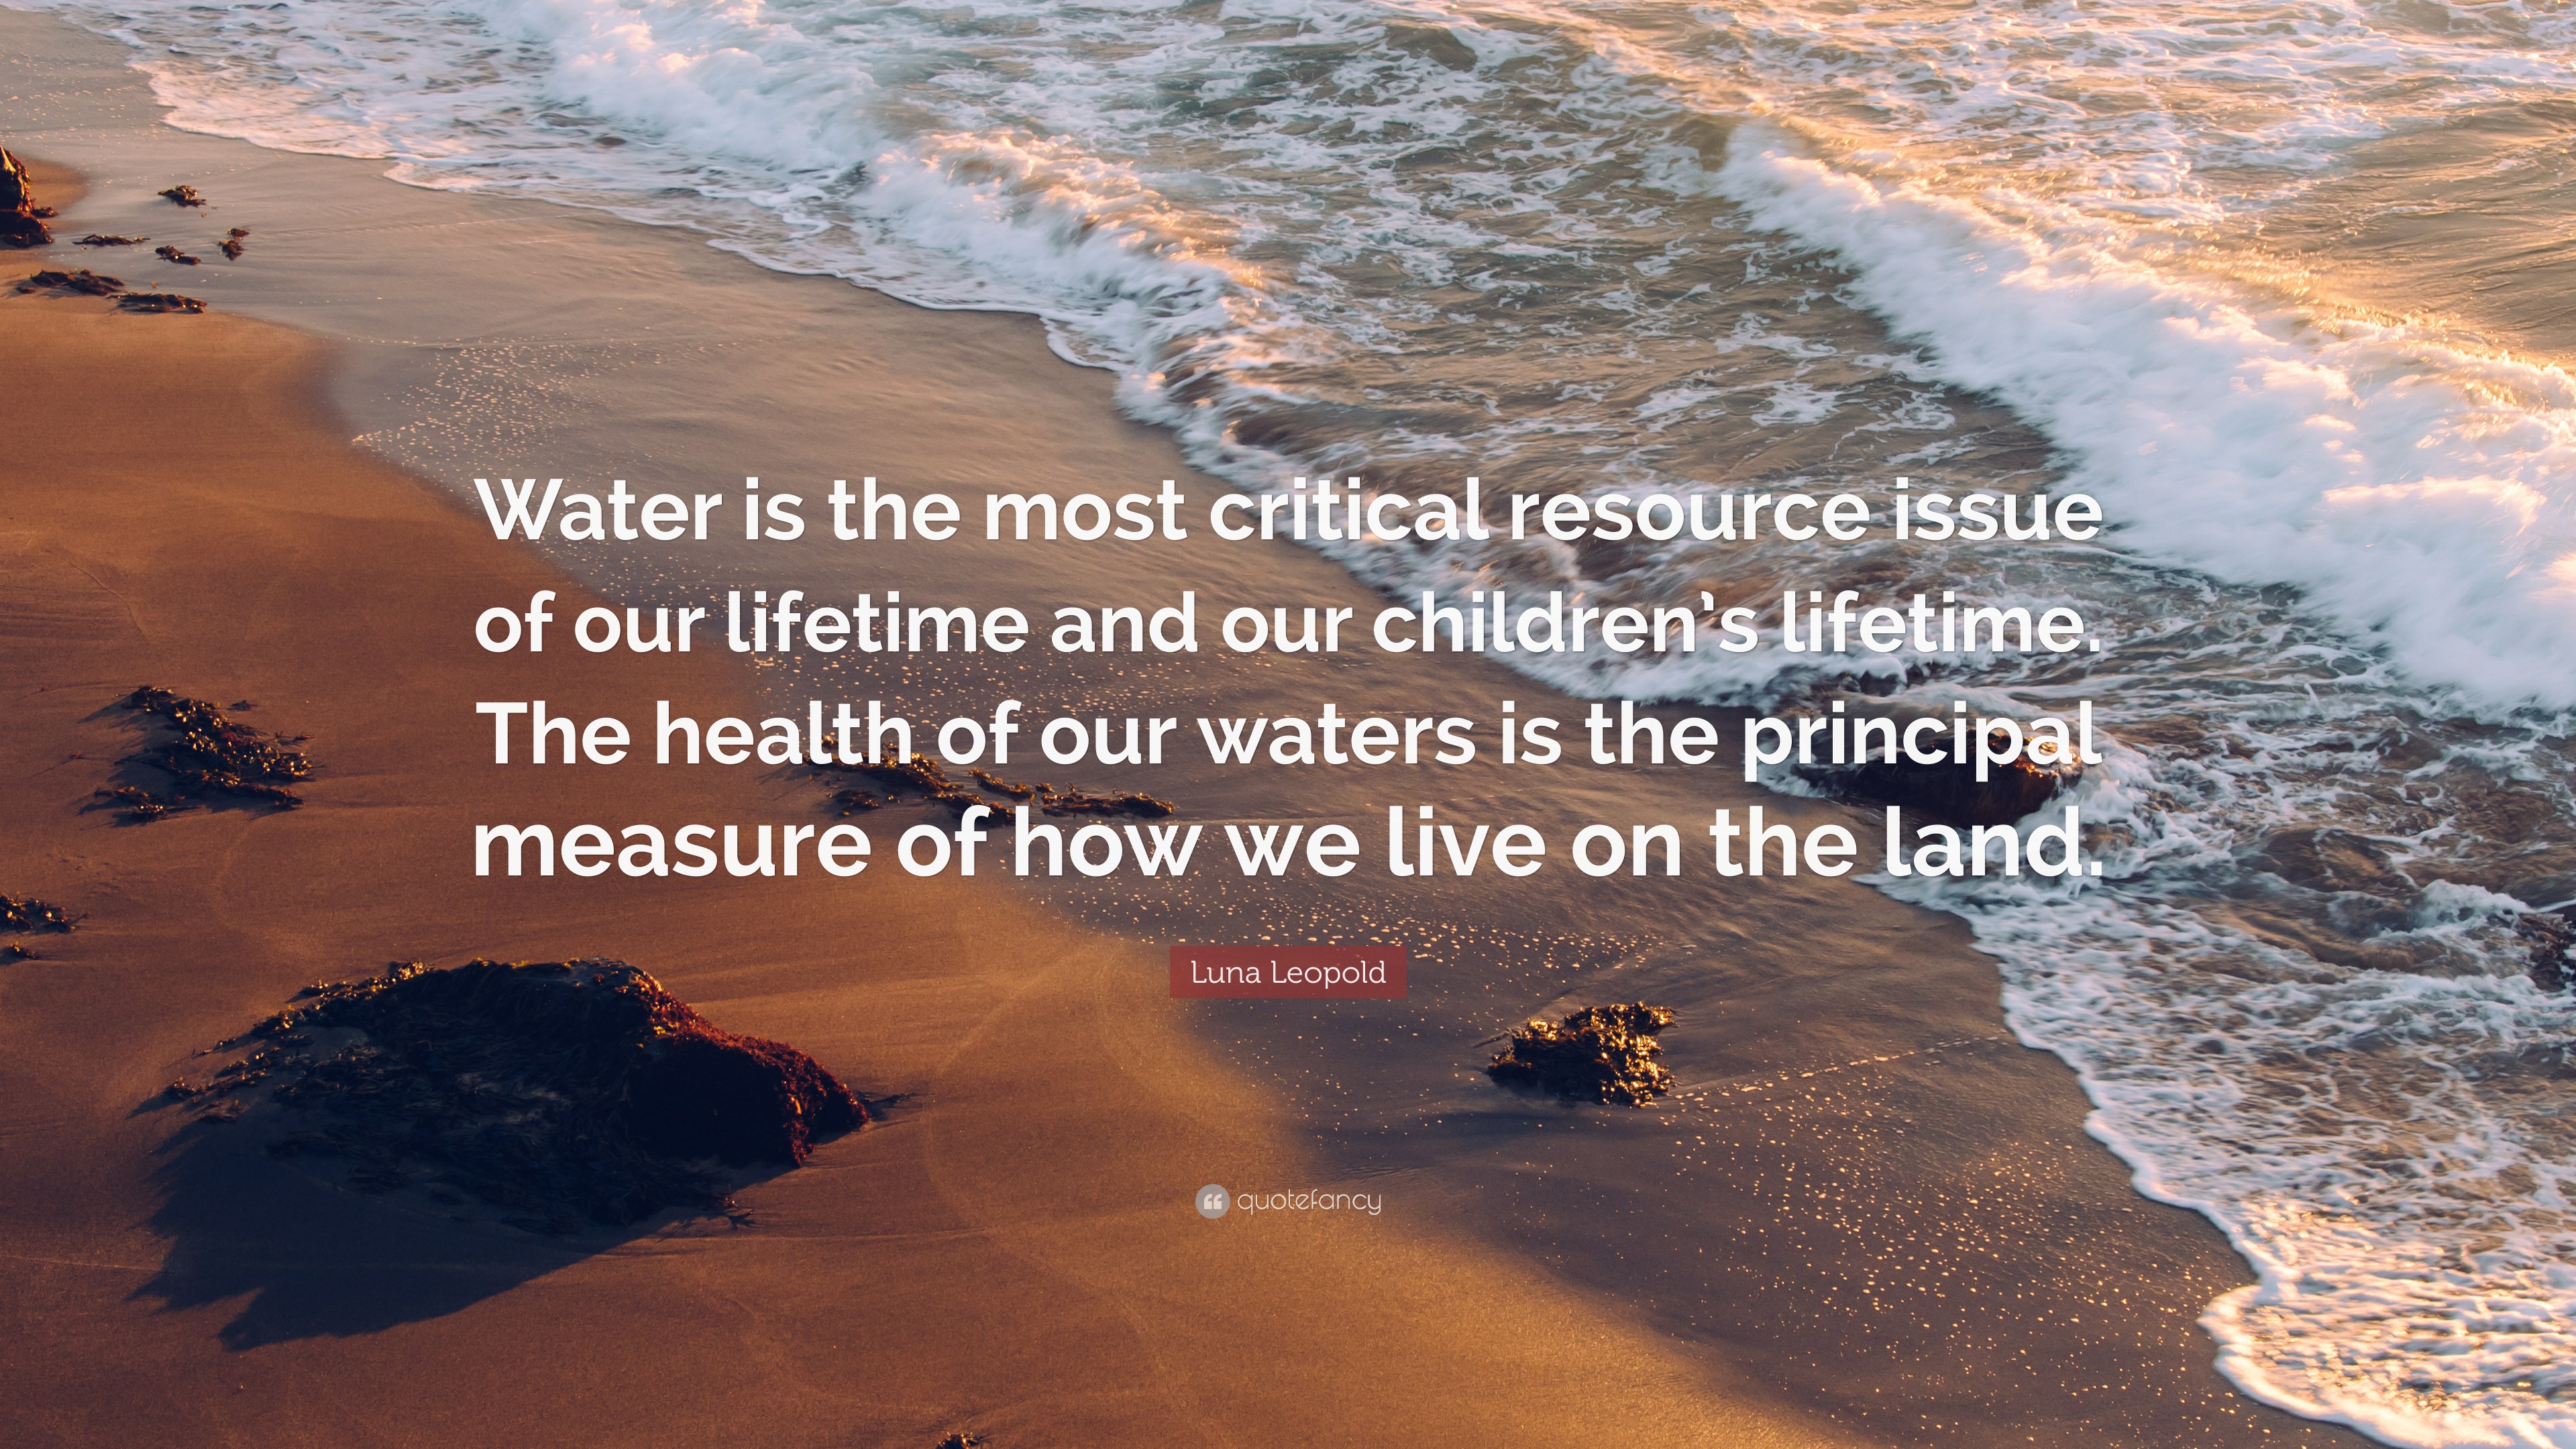 Luna Leopold Quote: “Water is the most critical resource issue of our ...